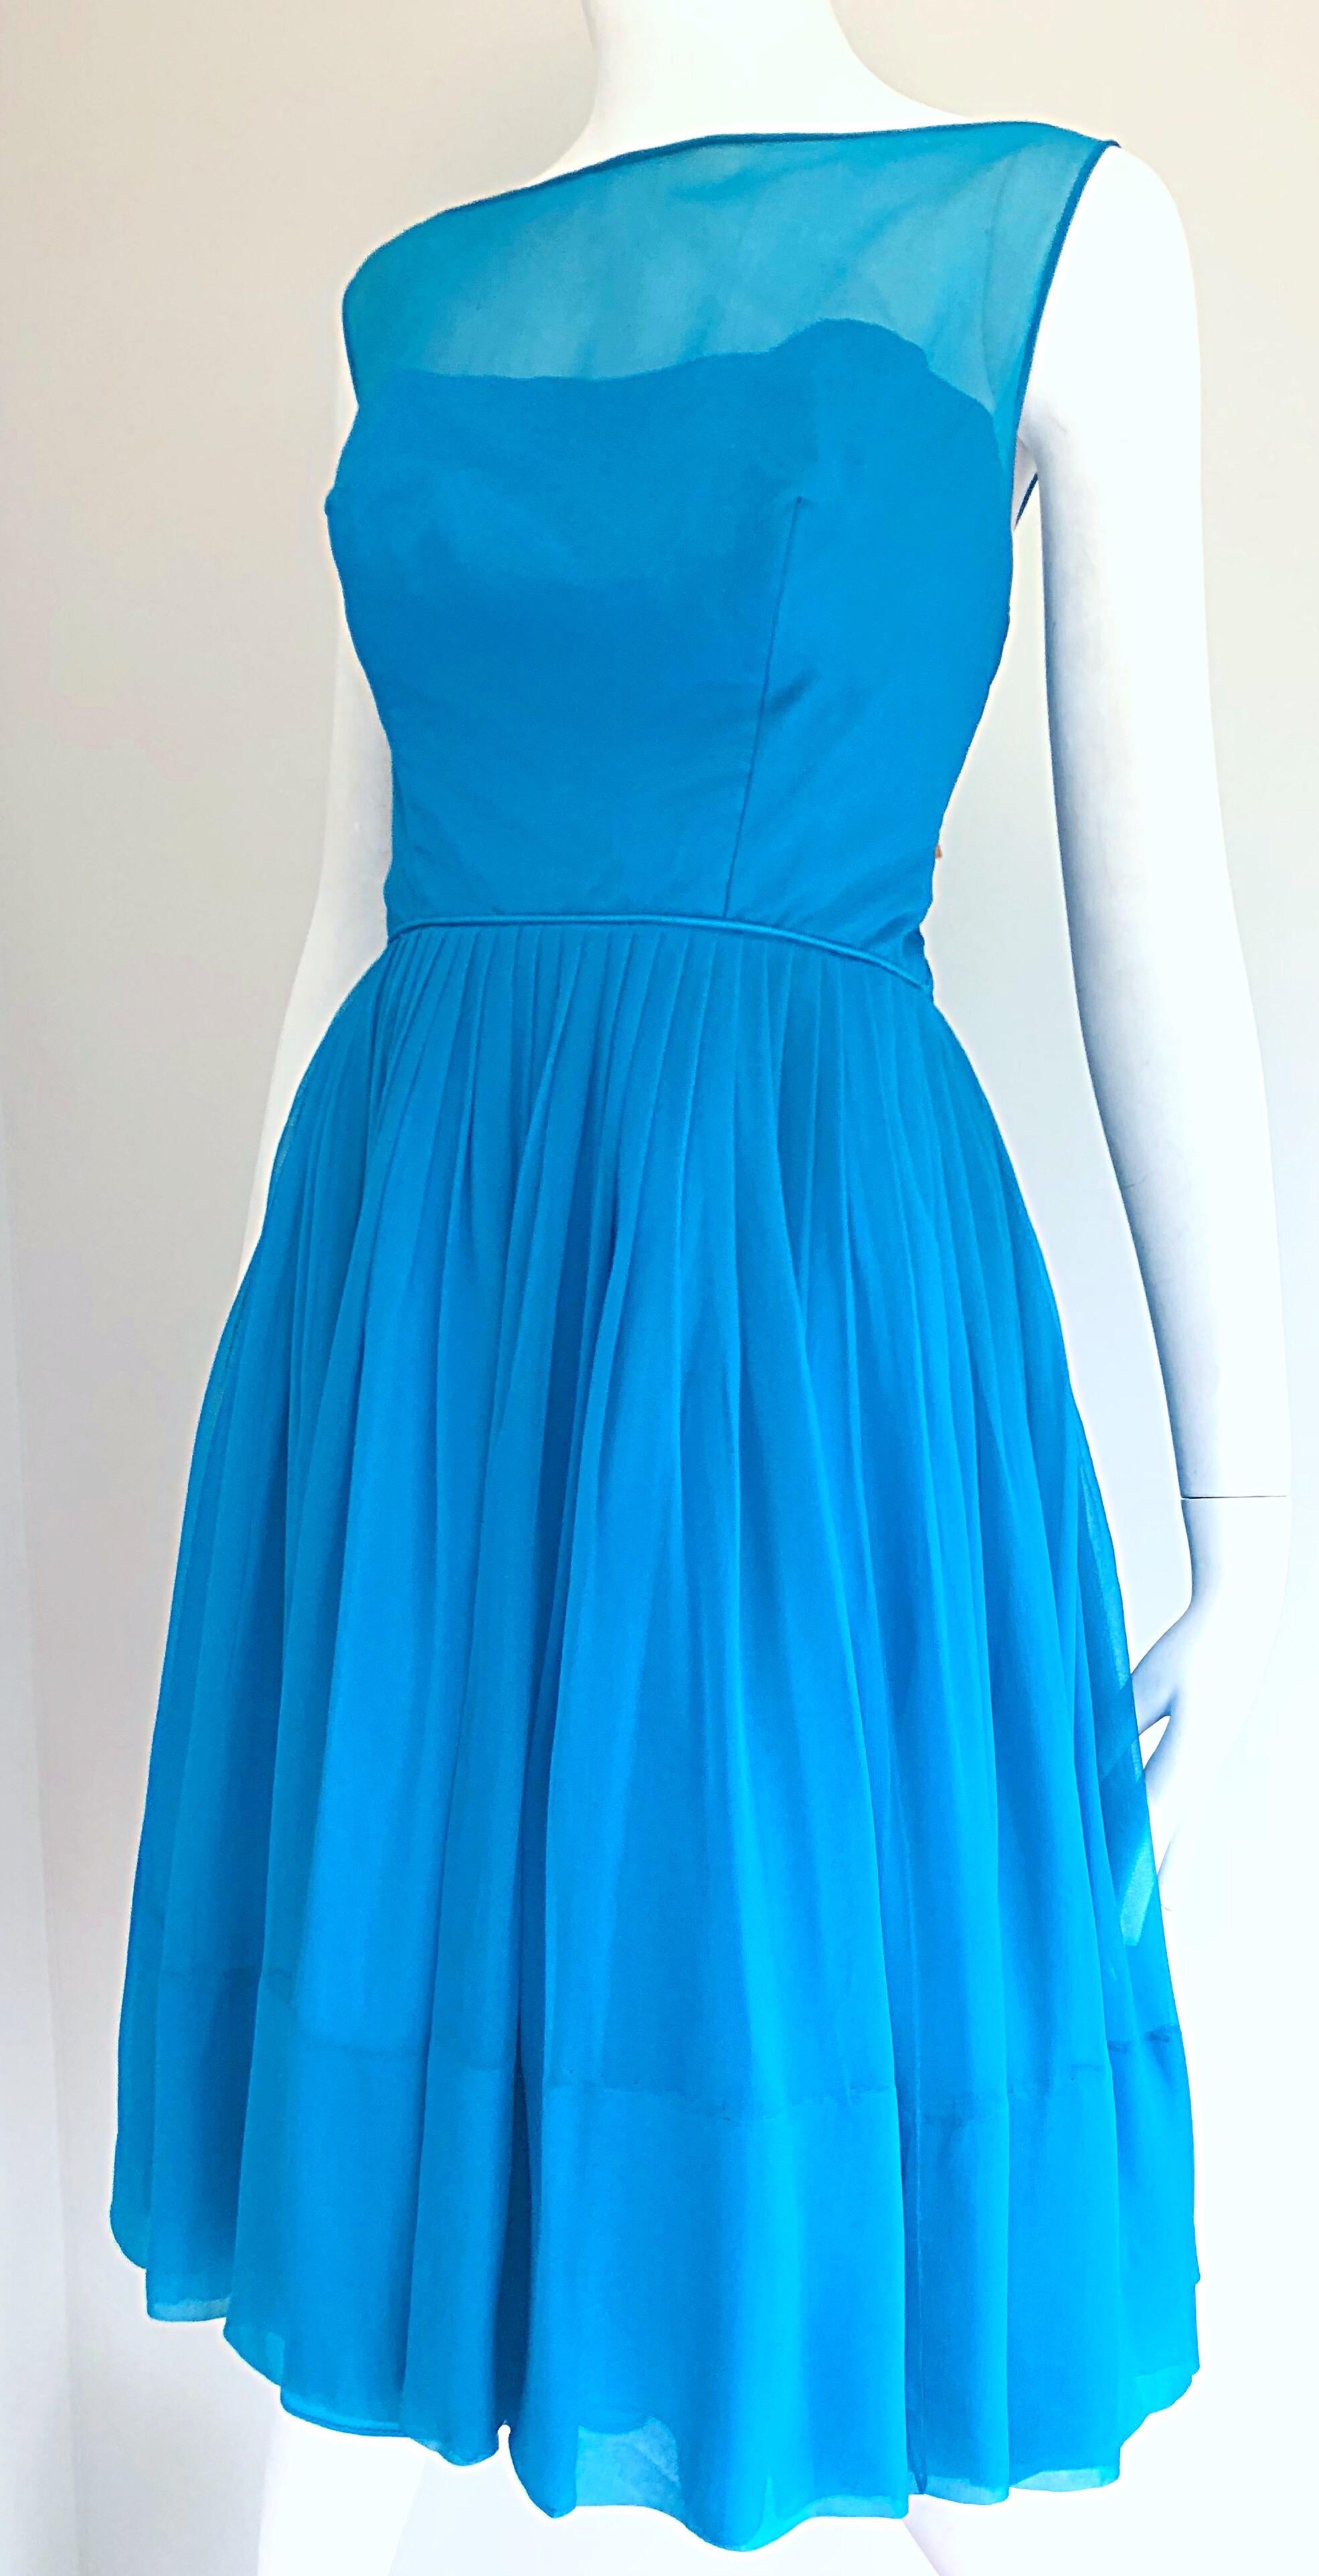 1950s Turquoise Blue Silk Chiffon Nude Illusion Fit n' Flare Vintage 50s Dress 5